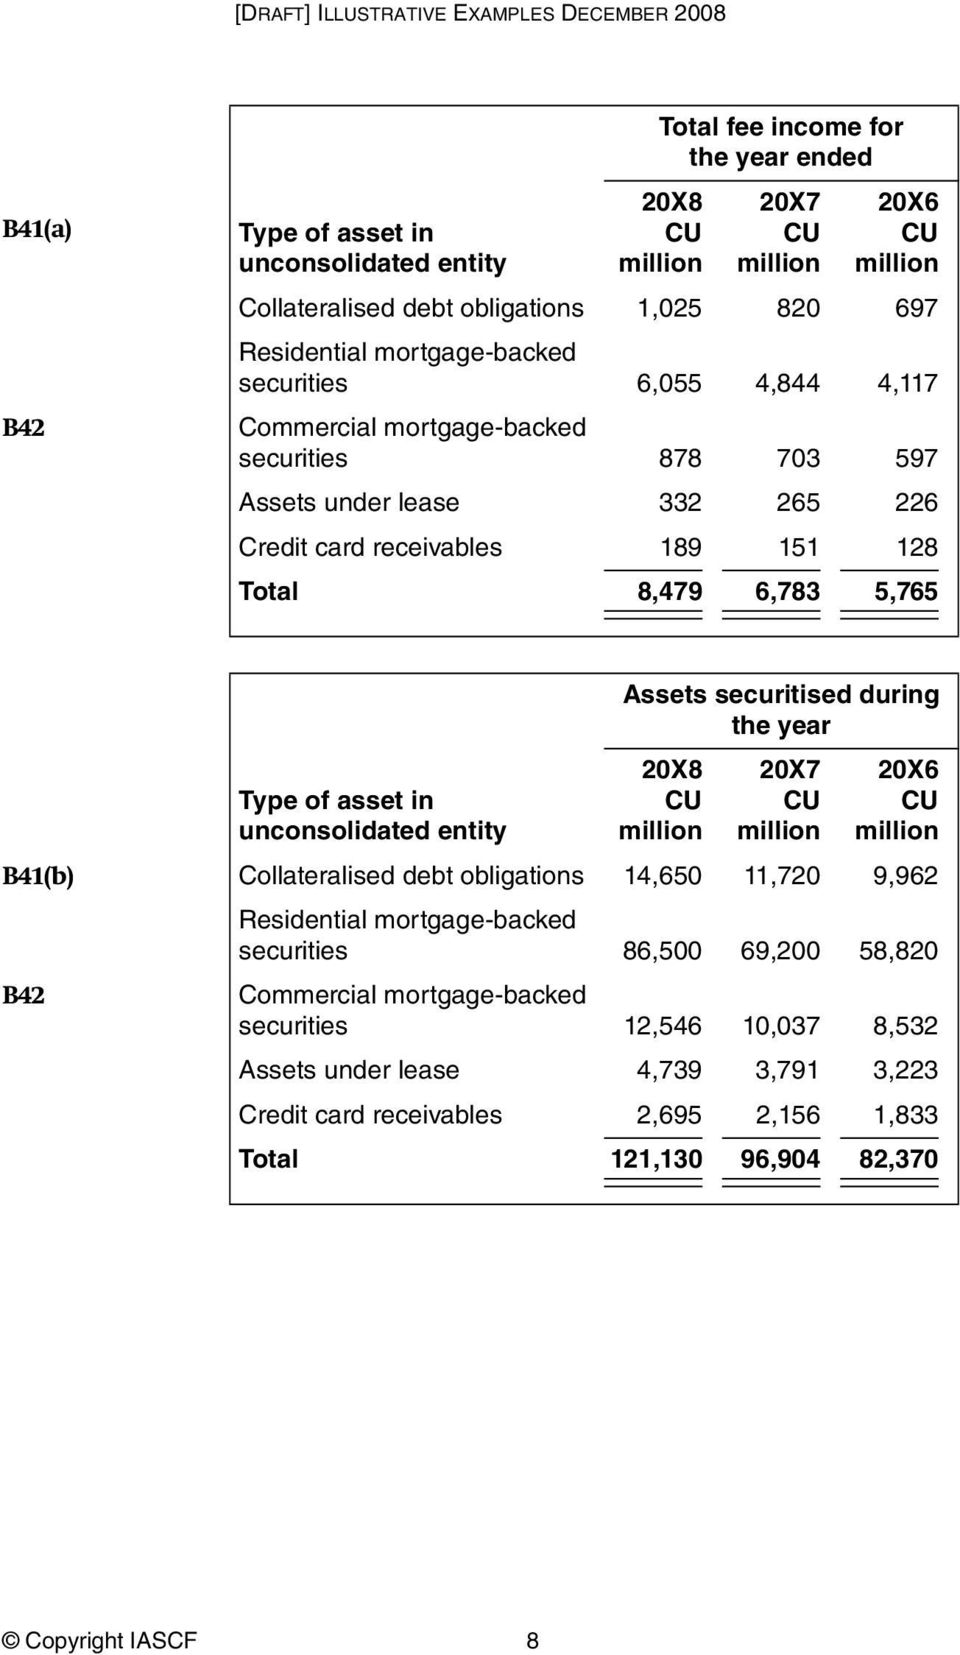 5,765 Assets securitised during the year 20X8 20X7 20X6 Type of asset in unconsolidated entity B41(b) Collateralised debt obligations 14,650 11,720 9,962 B42 Residential mortgage-backed